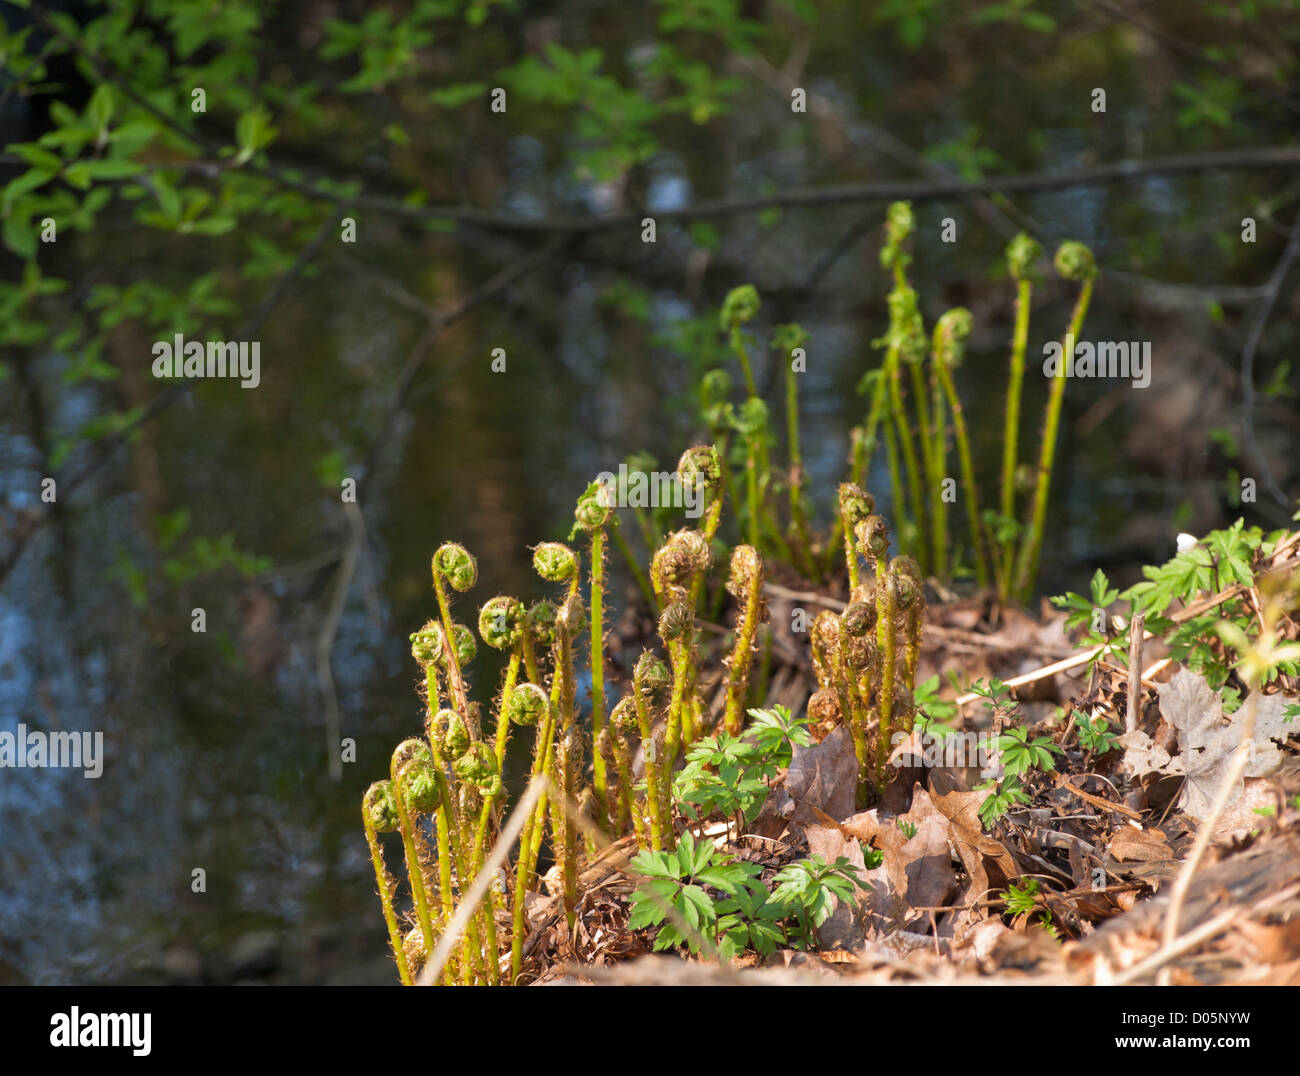 Spring impressions in the forests of Oslo Norway. Fern or bracken on an outcrop, trees with spring leaves reflecting in water Stock Photo